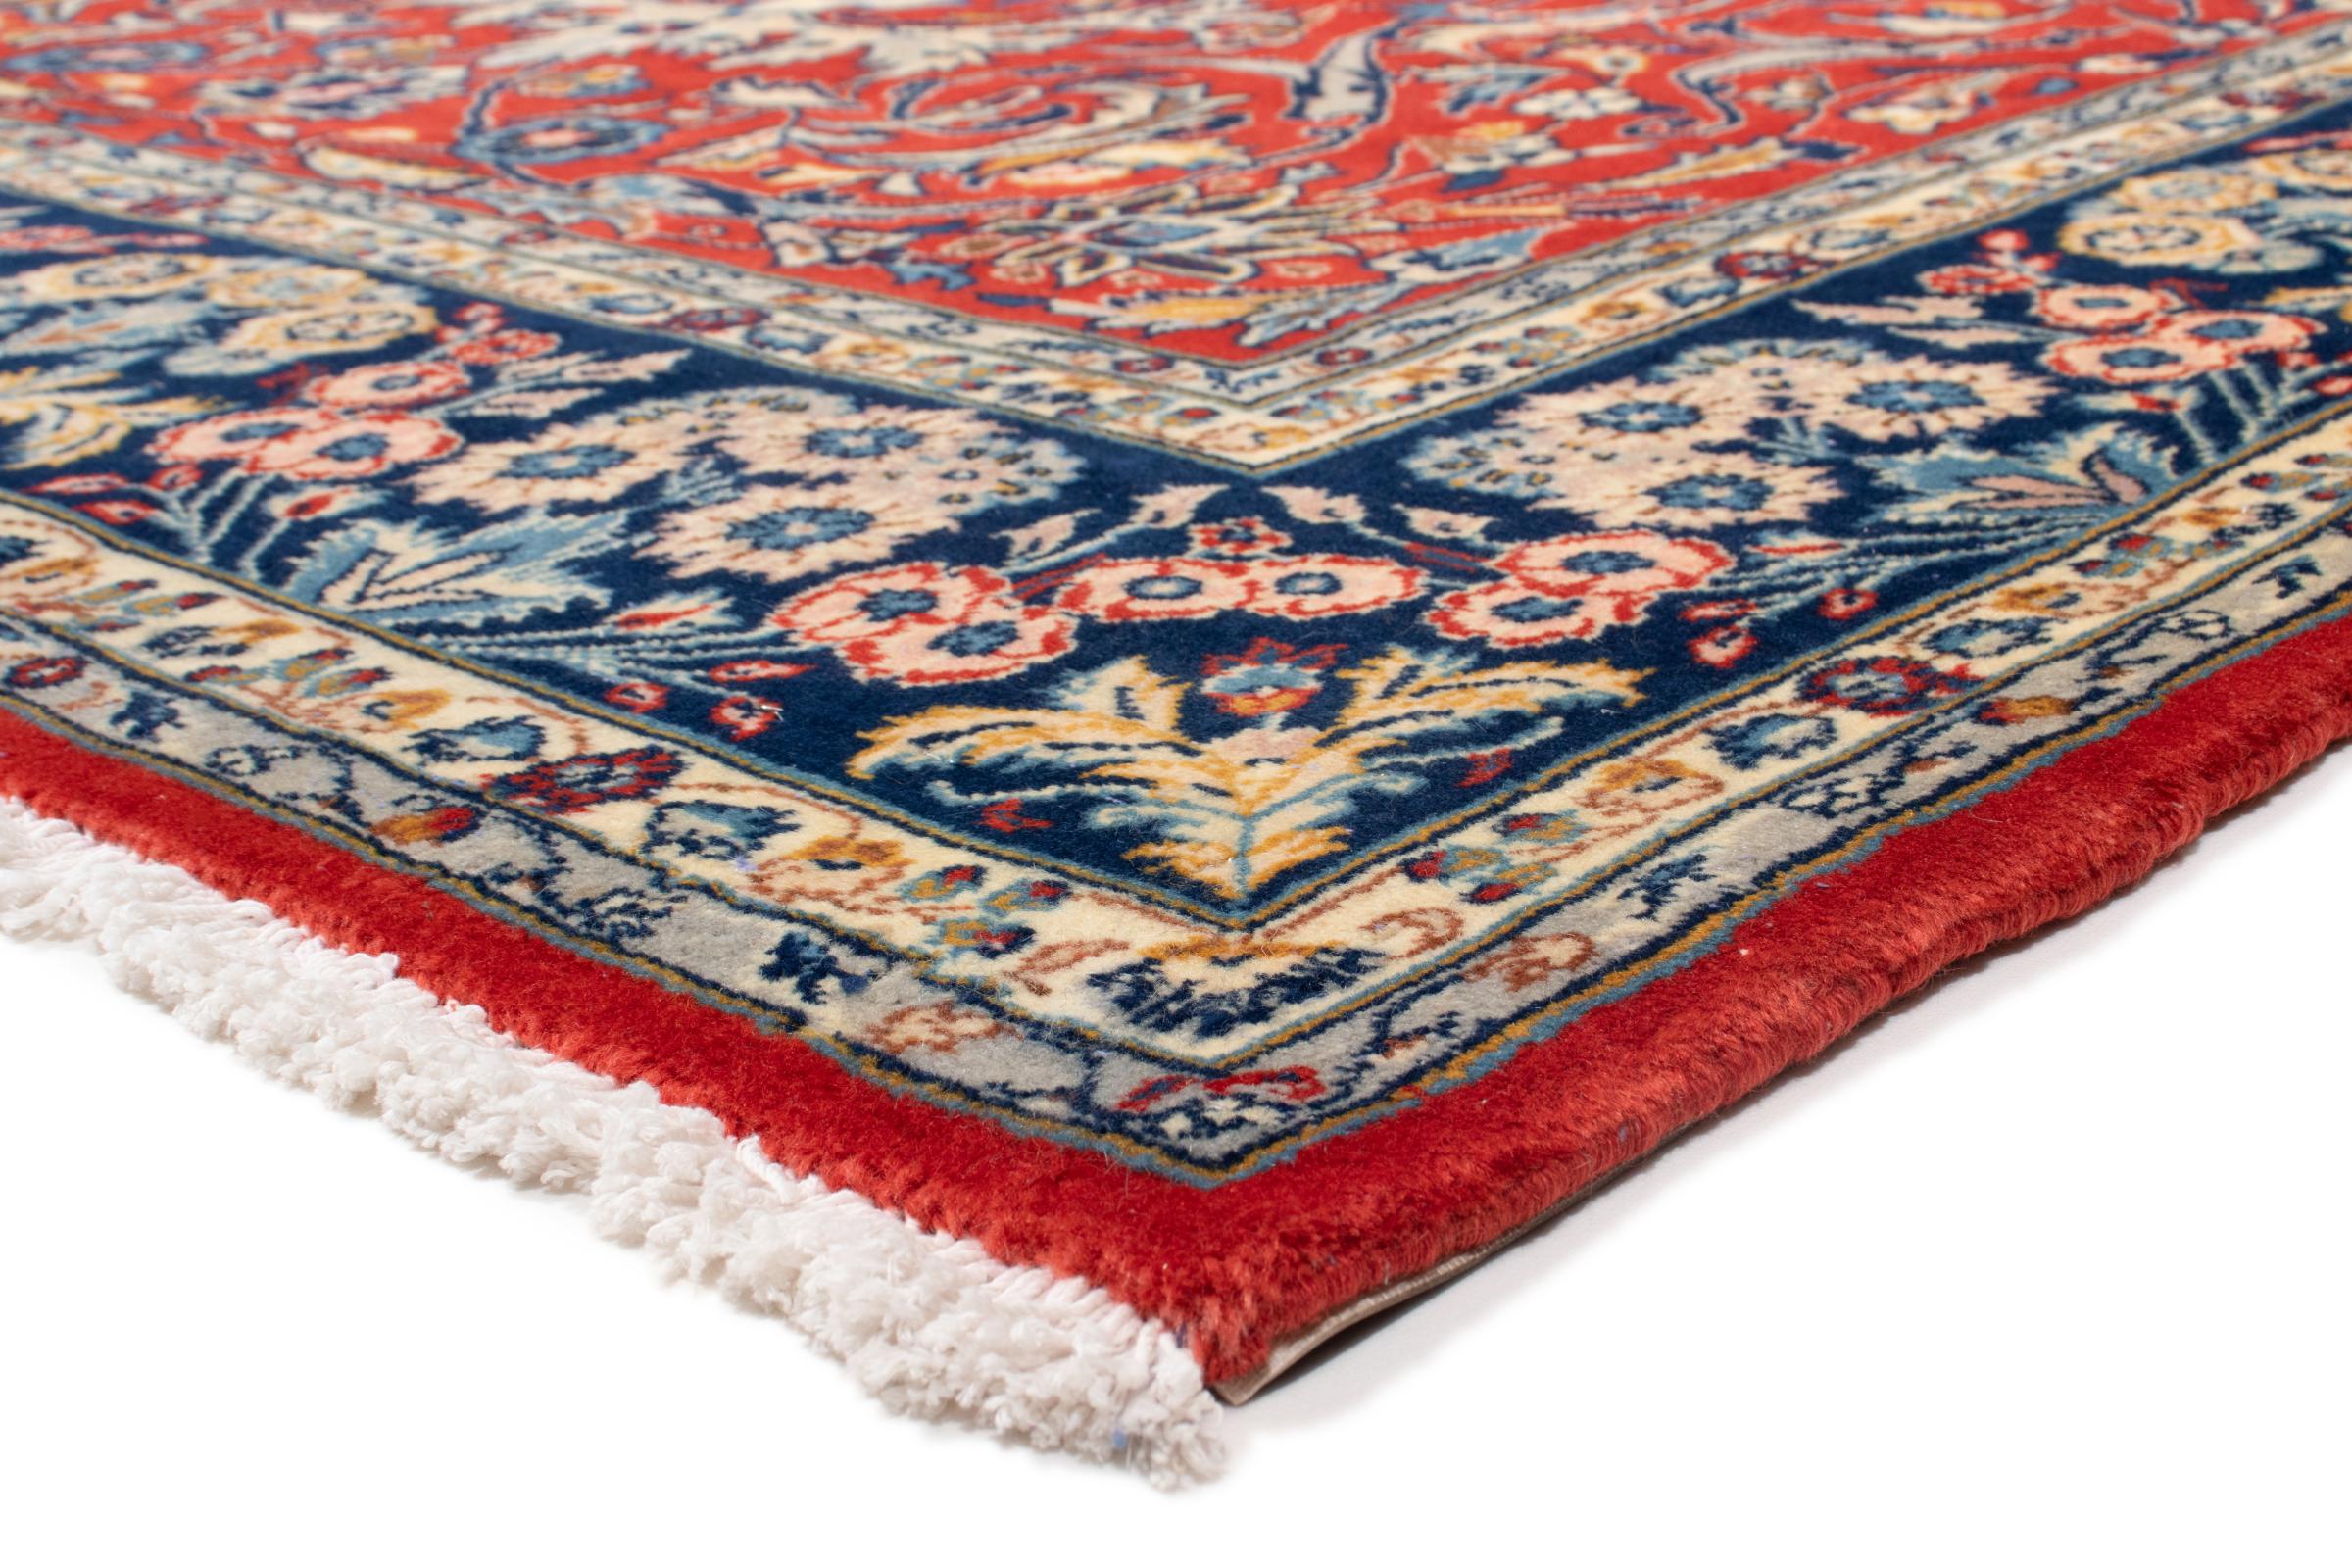 Stone Round 201x201 ID222466  NainTrading: Oriental Carpets in